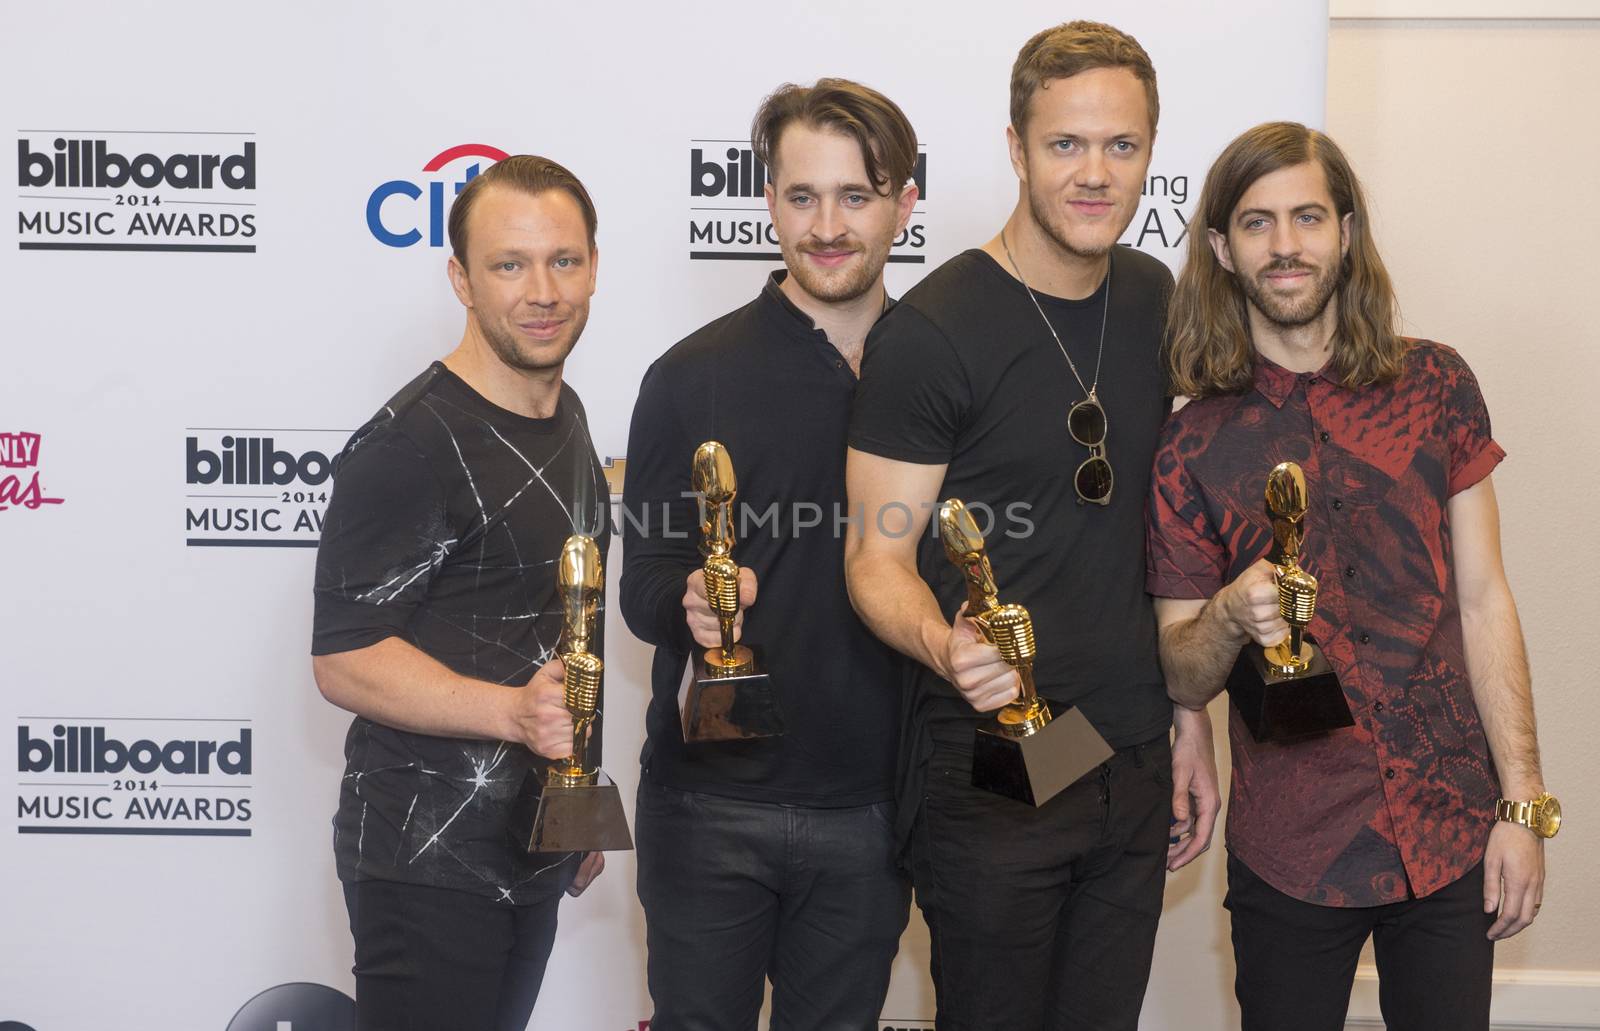 LAS VEGAS - MAY 18 : Members of the alternative rock band Imagine Dragons attend the 2014 Billboard Music Awards press room at the MGM Grand Garden Arena on May 18 , 2014 in Las Vegas. 